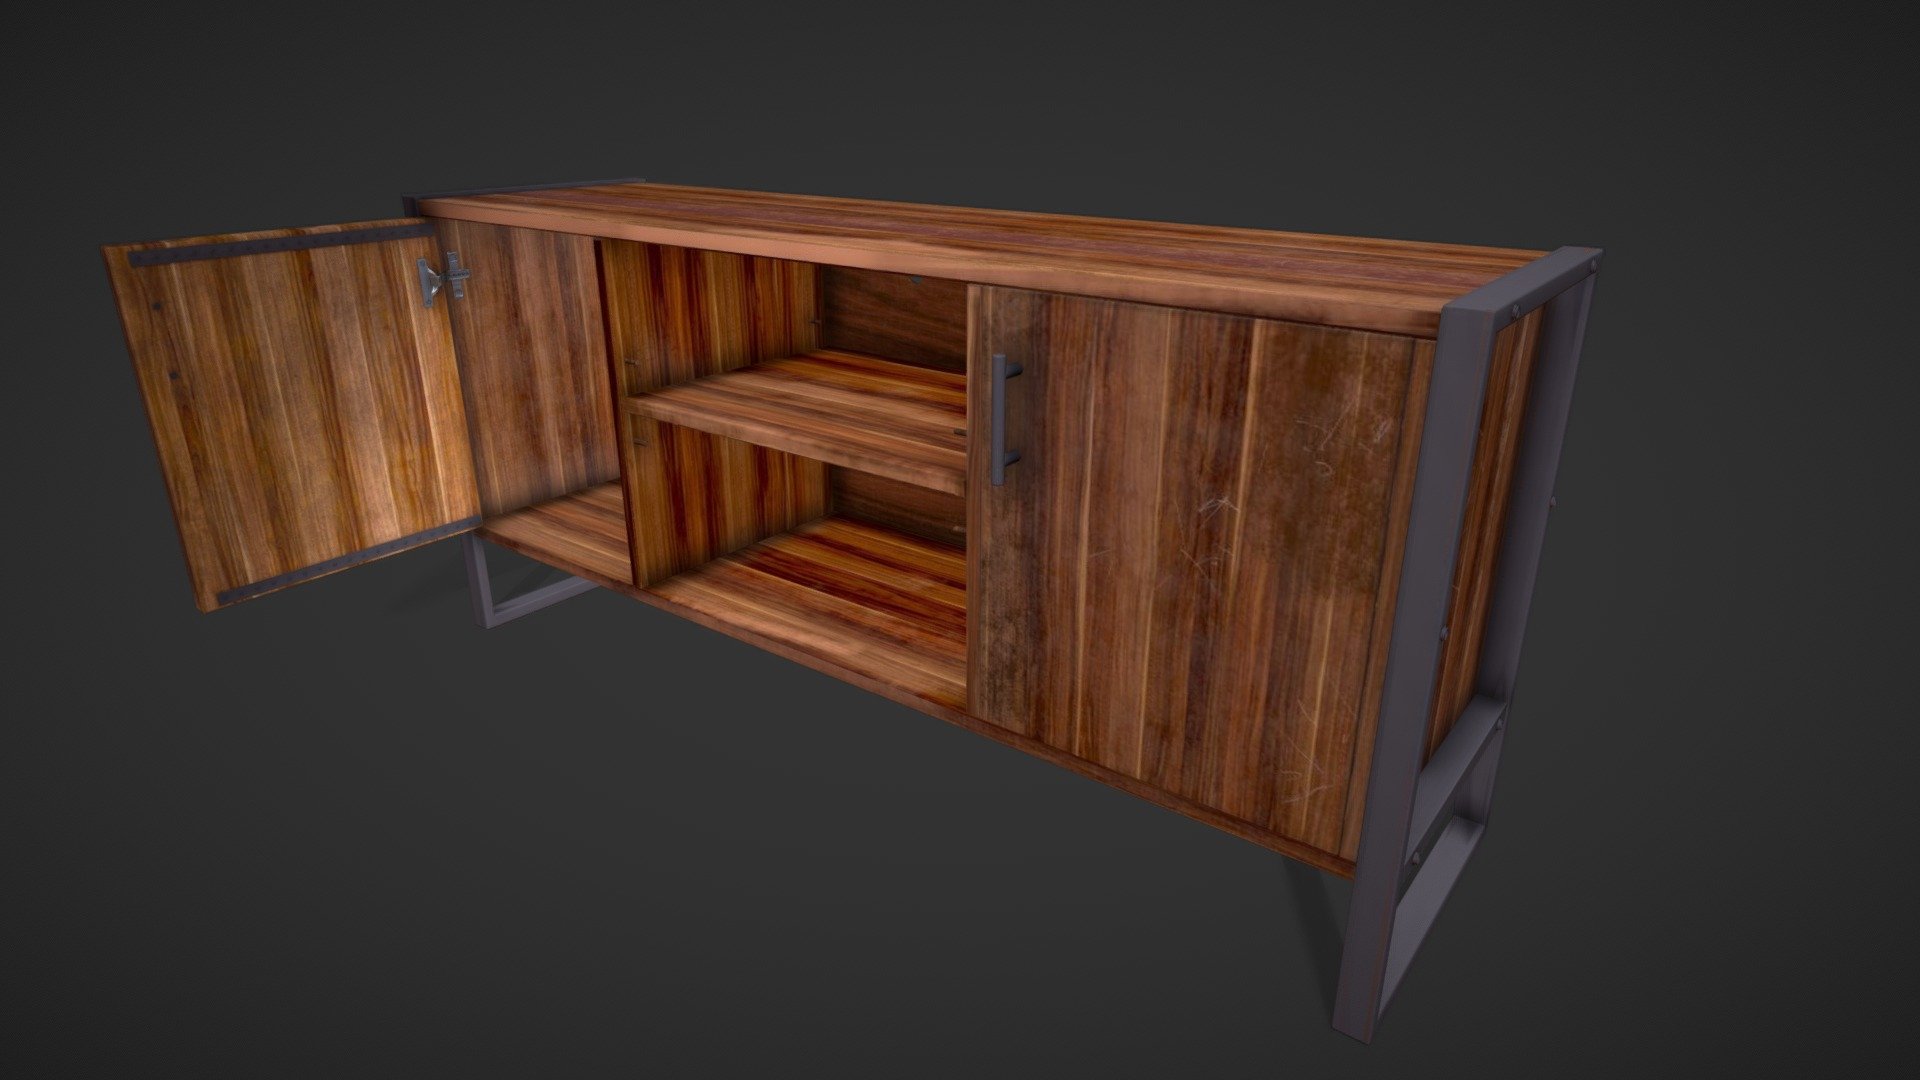 Biltmore TV Stand
Modeled in Maya
Textured in Substance Painter - Biltmore TV Stand - 3D model by ShaheenCG 3d model